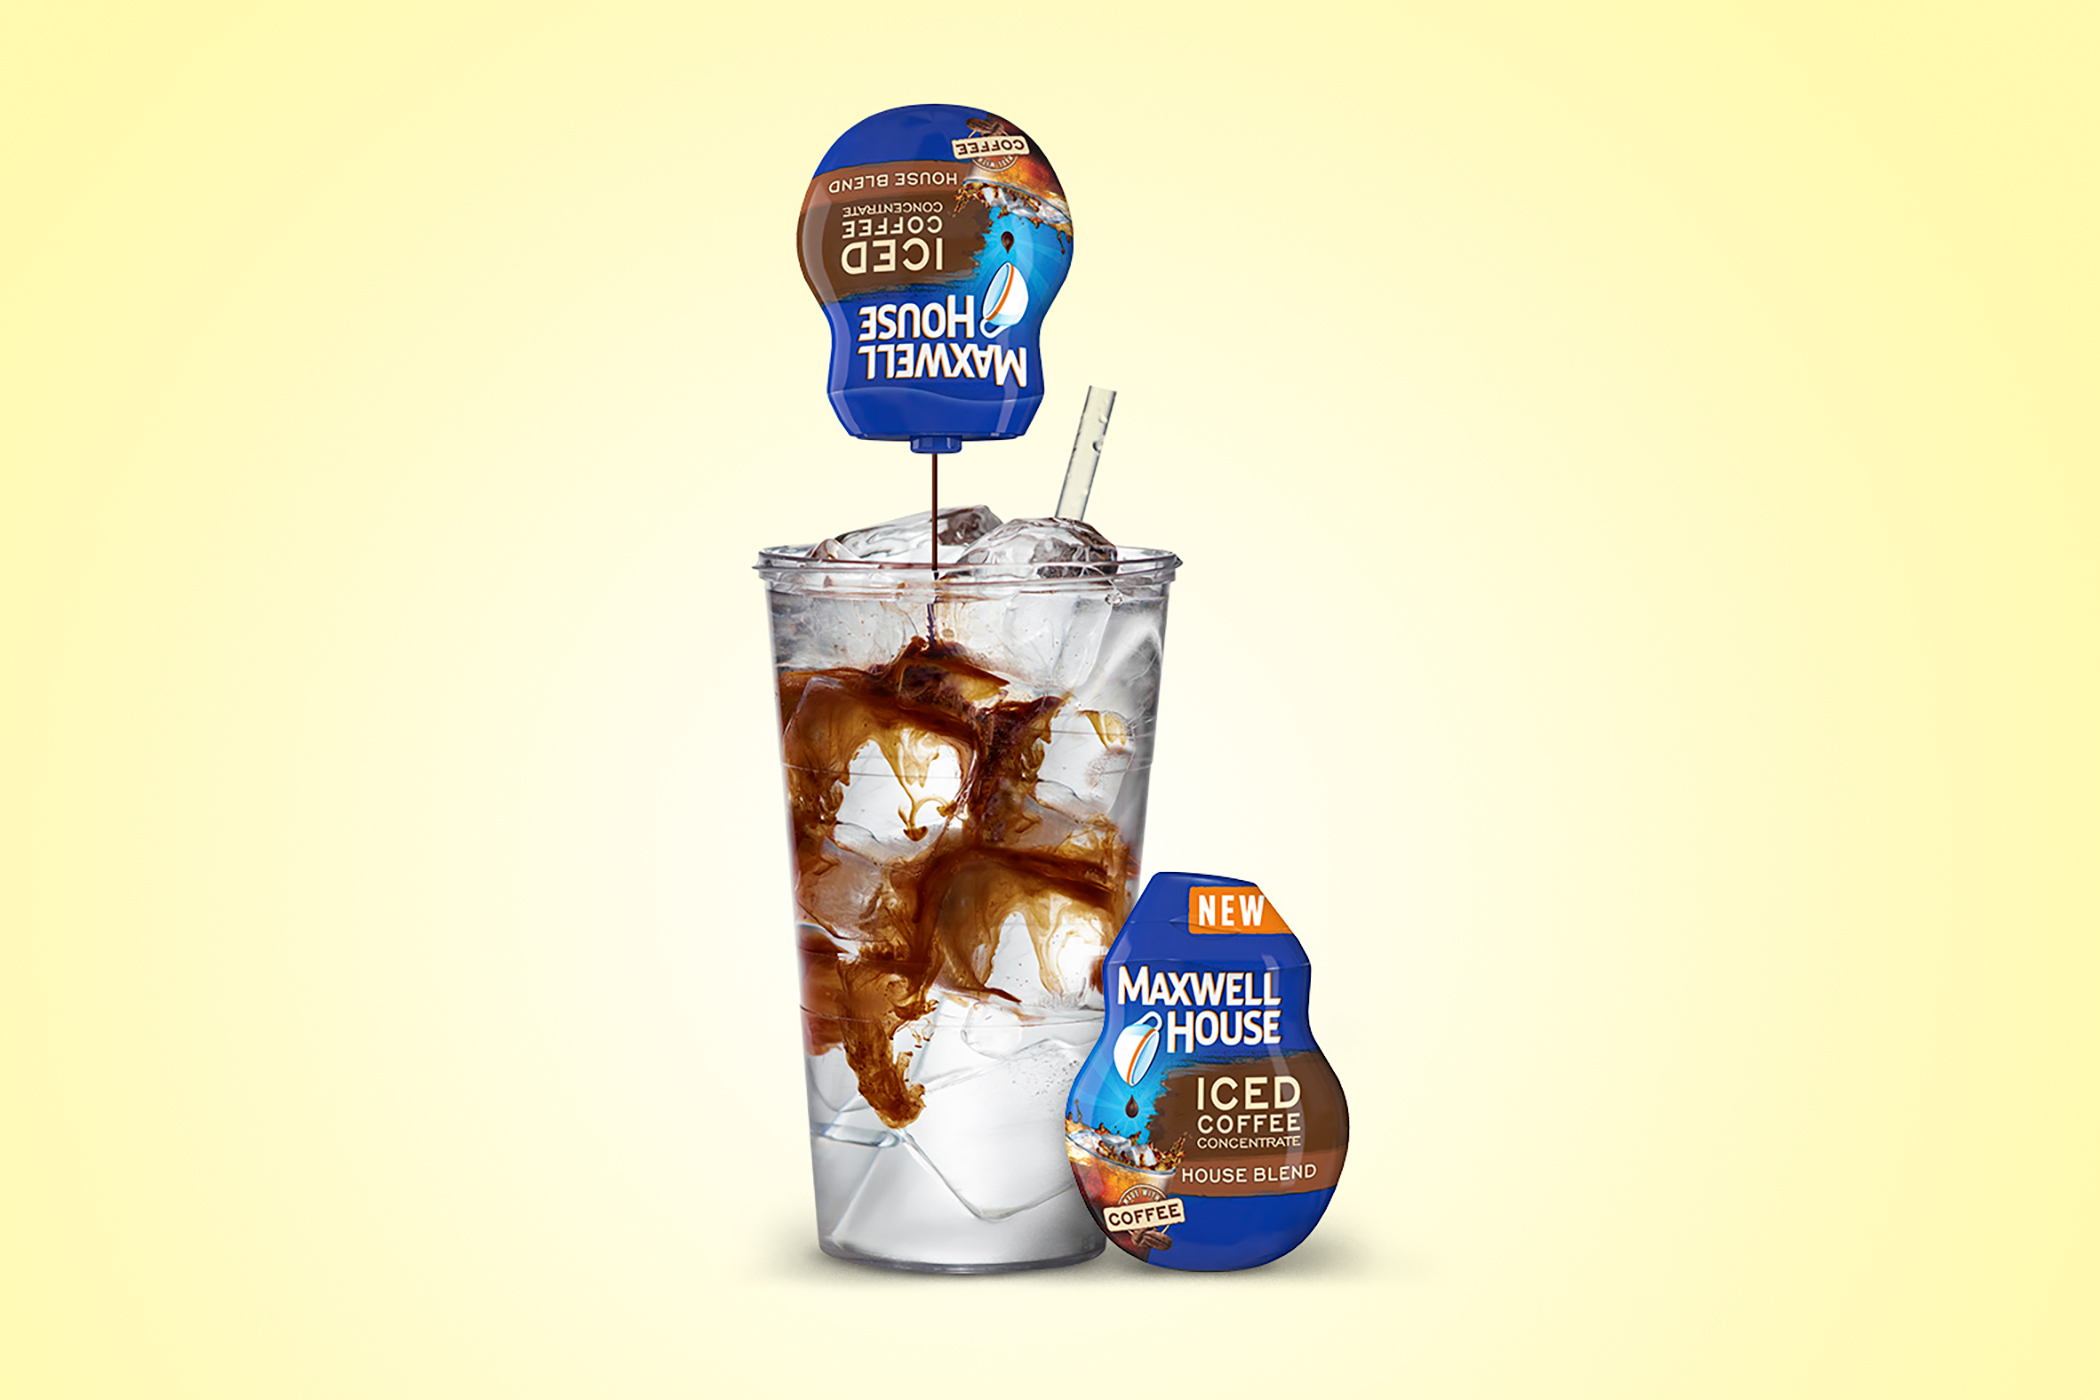 Maxwell House Iced Coffee concentrates